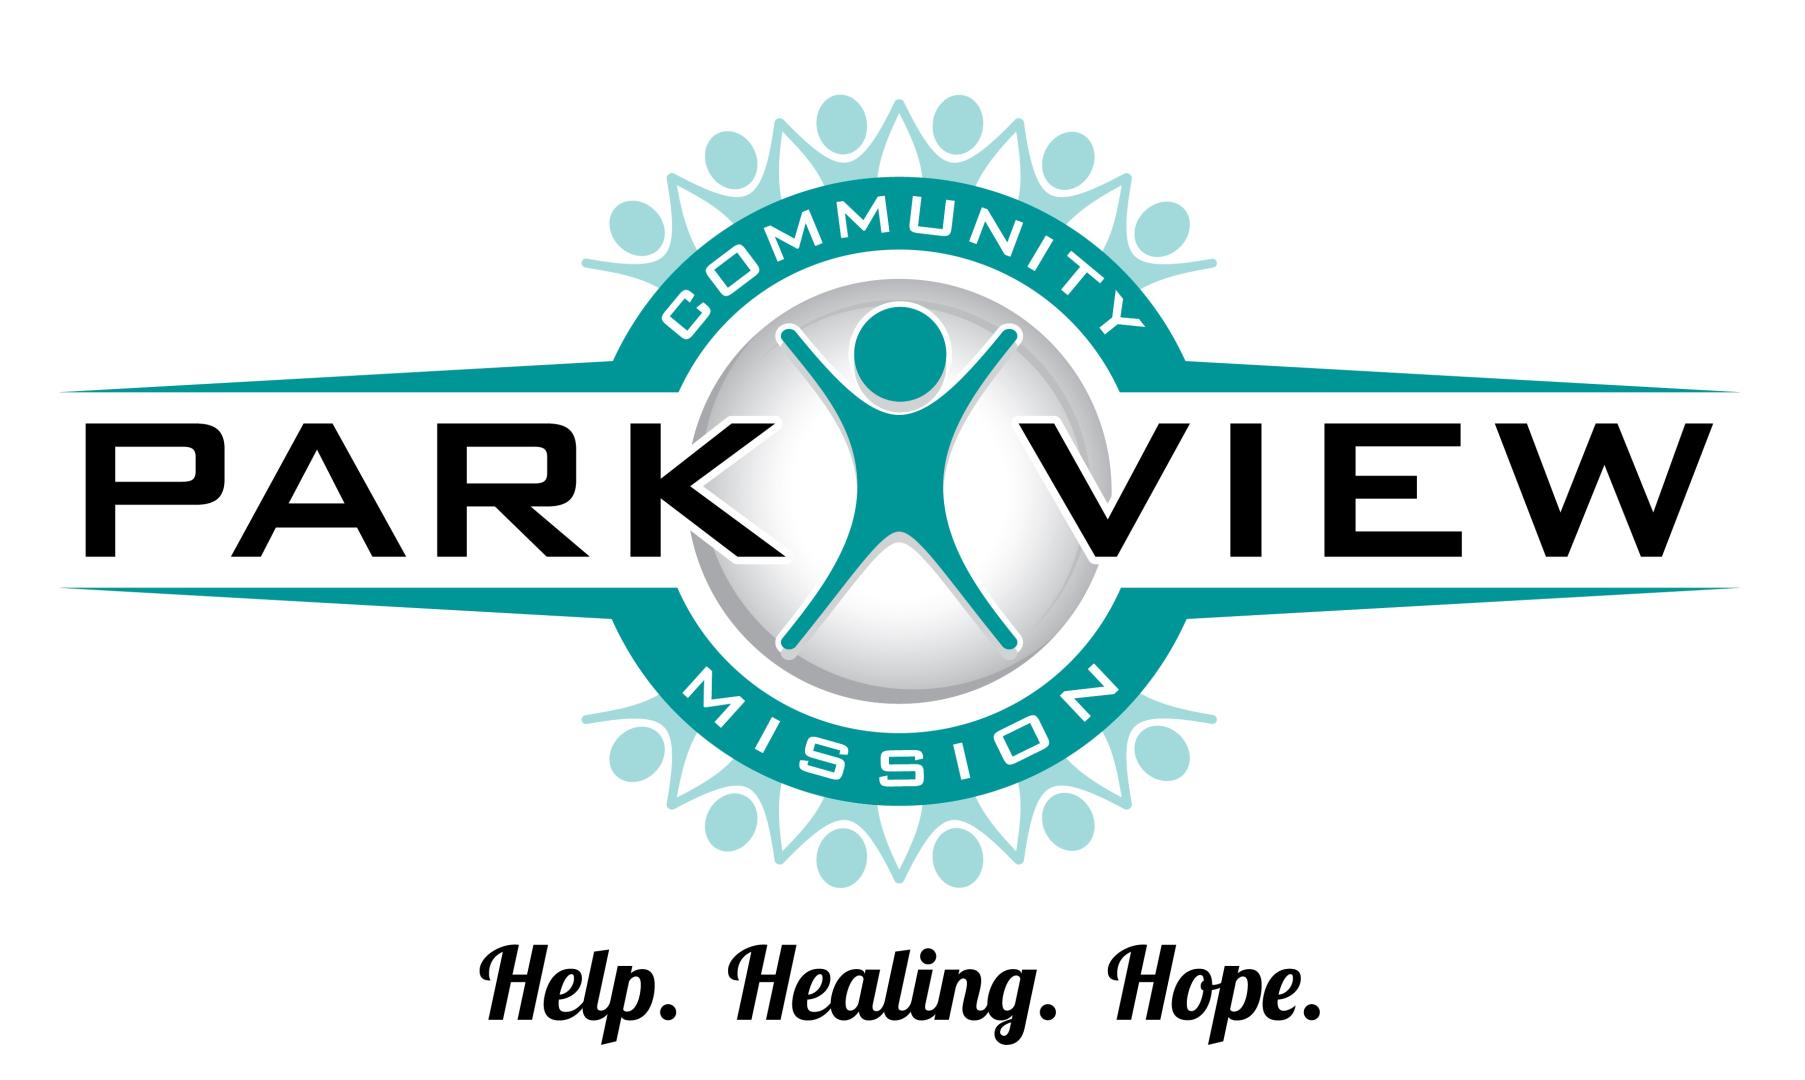 Picture of Park View Community Mission's logo that reads "Help. Healing. Hope."